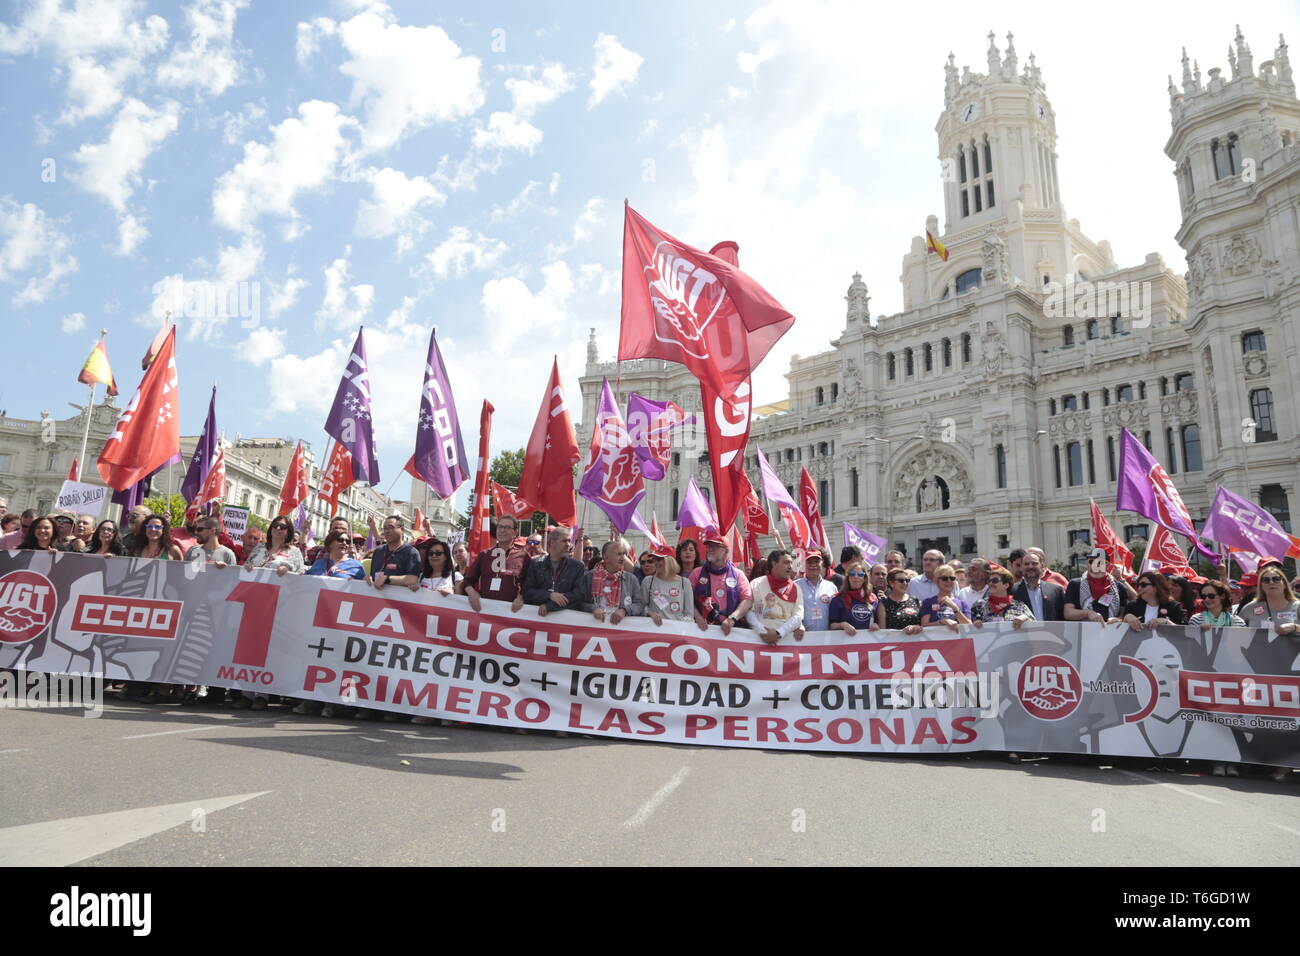 Madrid, Spain. 1st May, 2019. Protesters are seen holding a banner and flags during the demonstration.Thousands of protesters demonstrate on the International Workers' Day convoked by the majority unions UGT and CCOO to demand policies and reductions in unemployment levels in Spain, against job insecurity and labour rights. Politicians of the PSOE and Podemos have participated in the demonstration. Credit: Lito Lizana/SOPA Images/ZUMA Wire/Alamy Live News Stock Photo